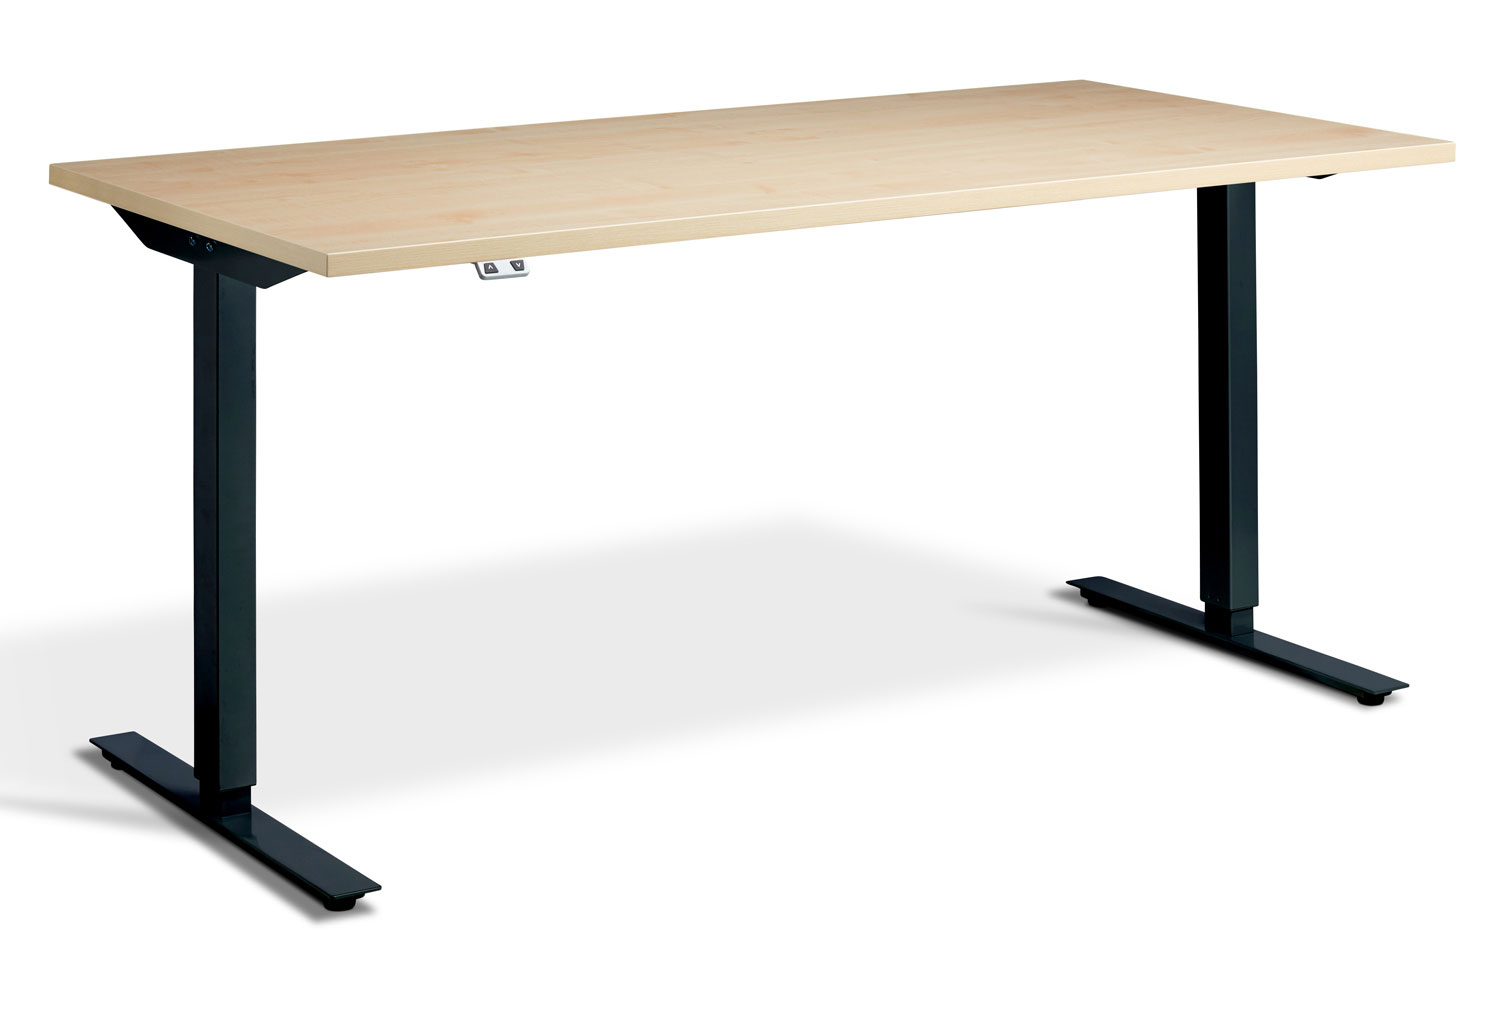 Calgary Dual Motor Height Adjustable Office Desk, 140wx80dx70-120h (cm), Black Frame, Maple, Express Delivery